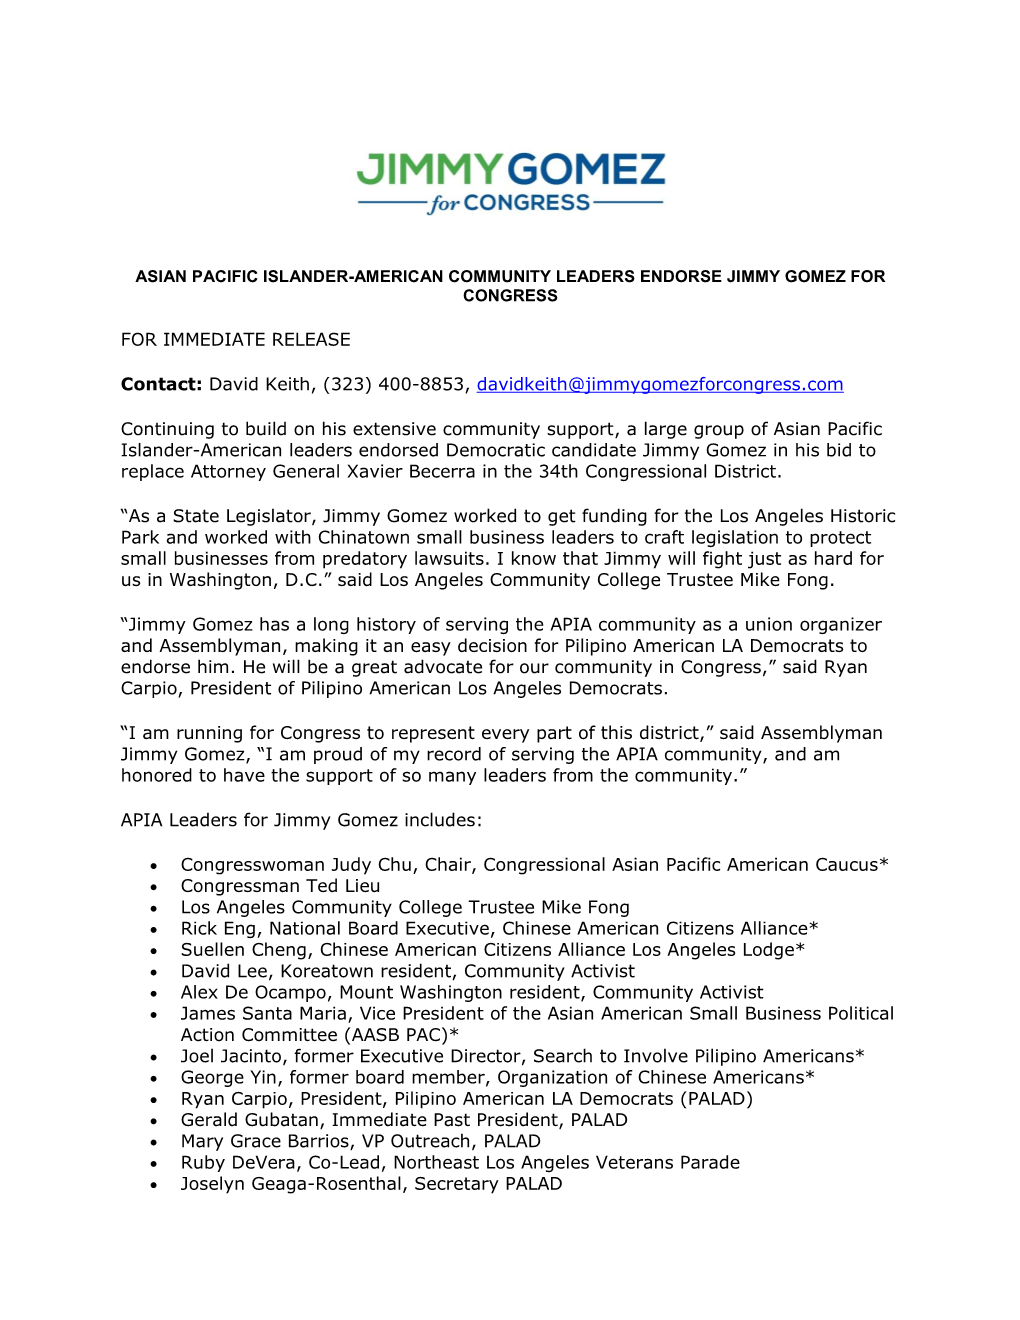 FOR IMMEDIATE RELEASE Contact: David Keith, (323) 400-8853, Davidkeith@Jimmygomezforcongress.Com Continuing to Build on His Exte